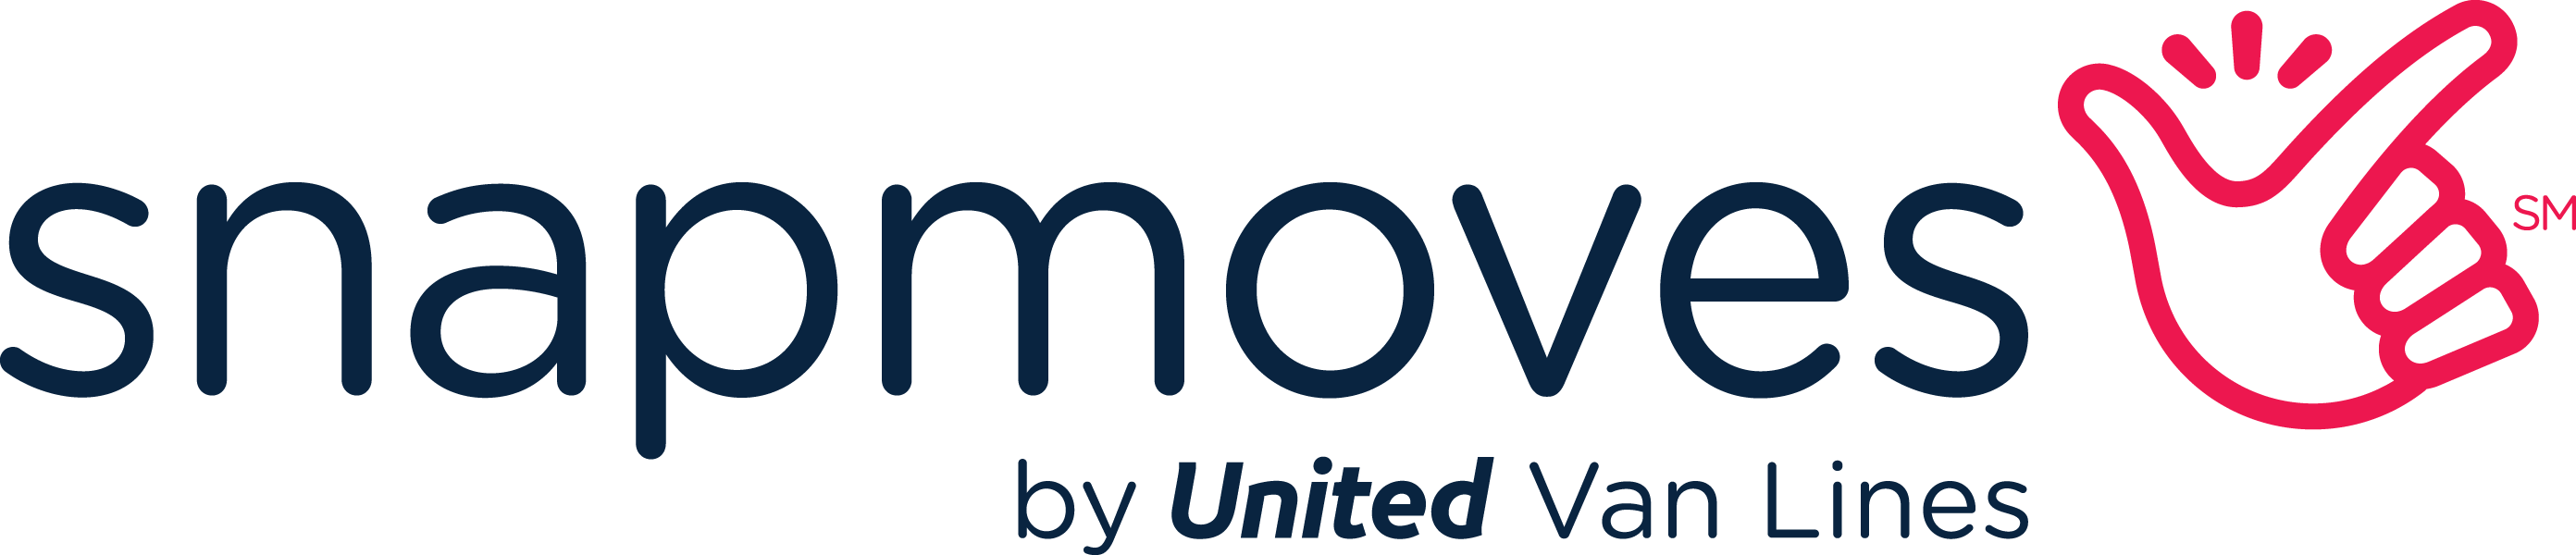 Small moves program - Snapmoves by United Van Lines logo